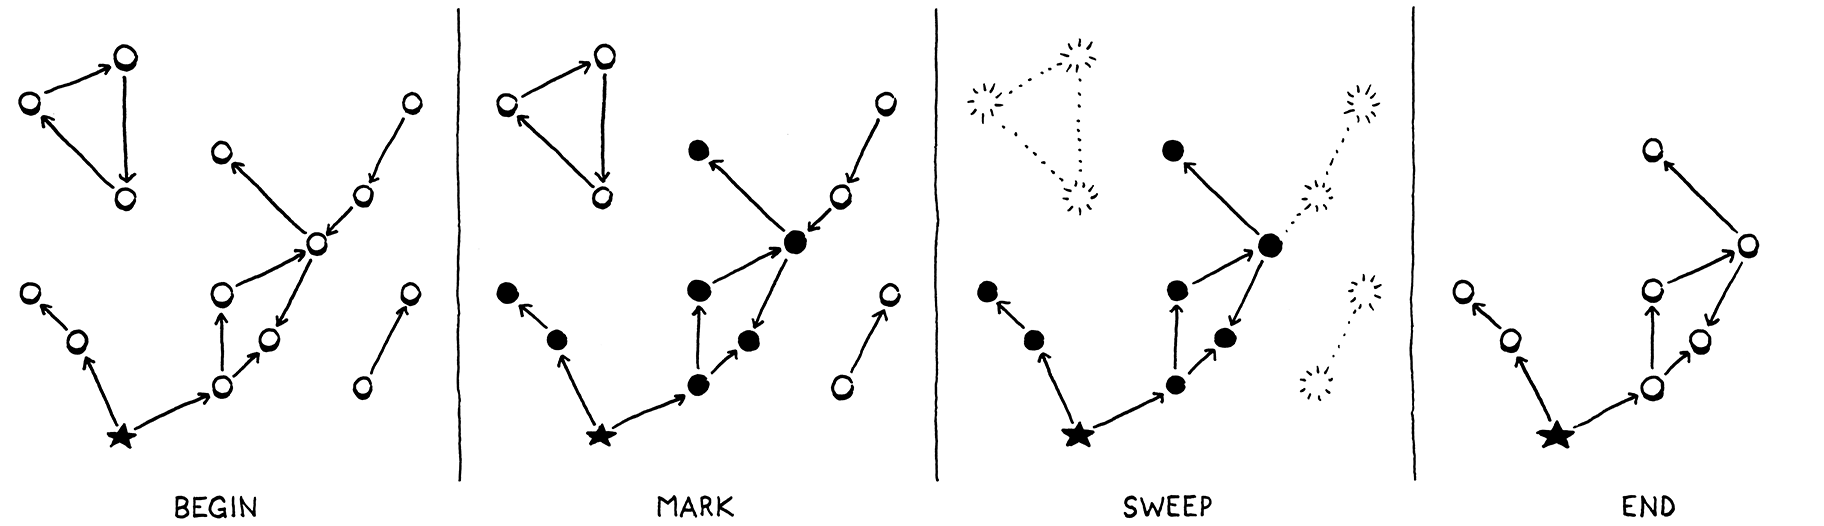 Starting from a graph of objects, first the reachable ones are marked, the remaining are swept, and then only the reachable remain.